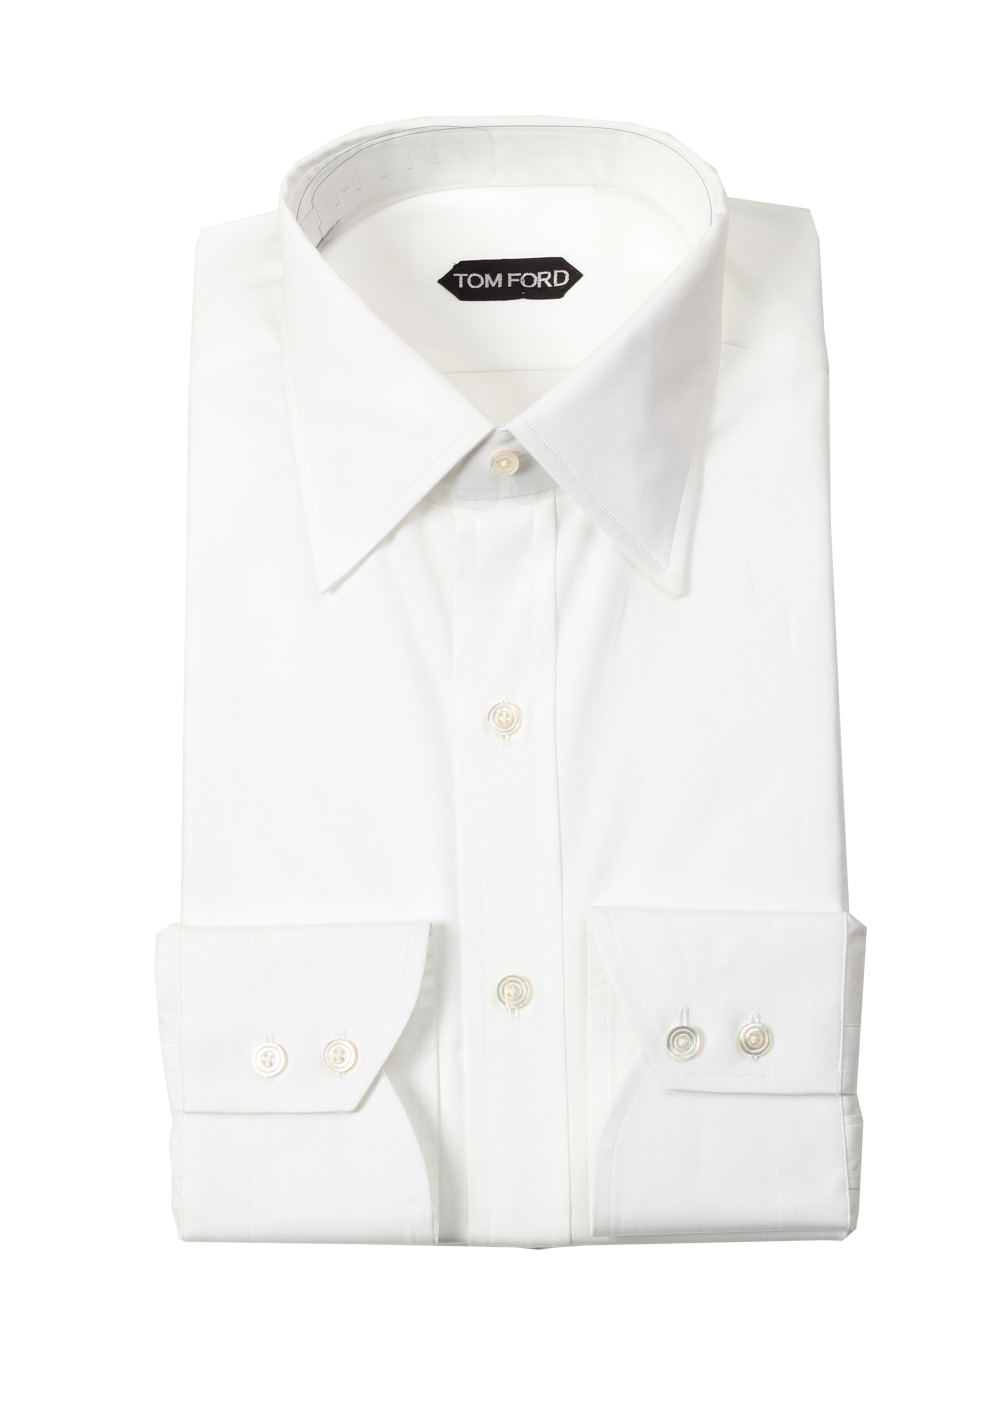 TOM FORD Solid White Dress Shirt Size 40 / 15,75 U.S. | Costume Limité